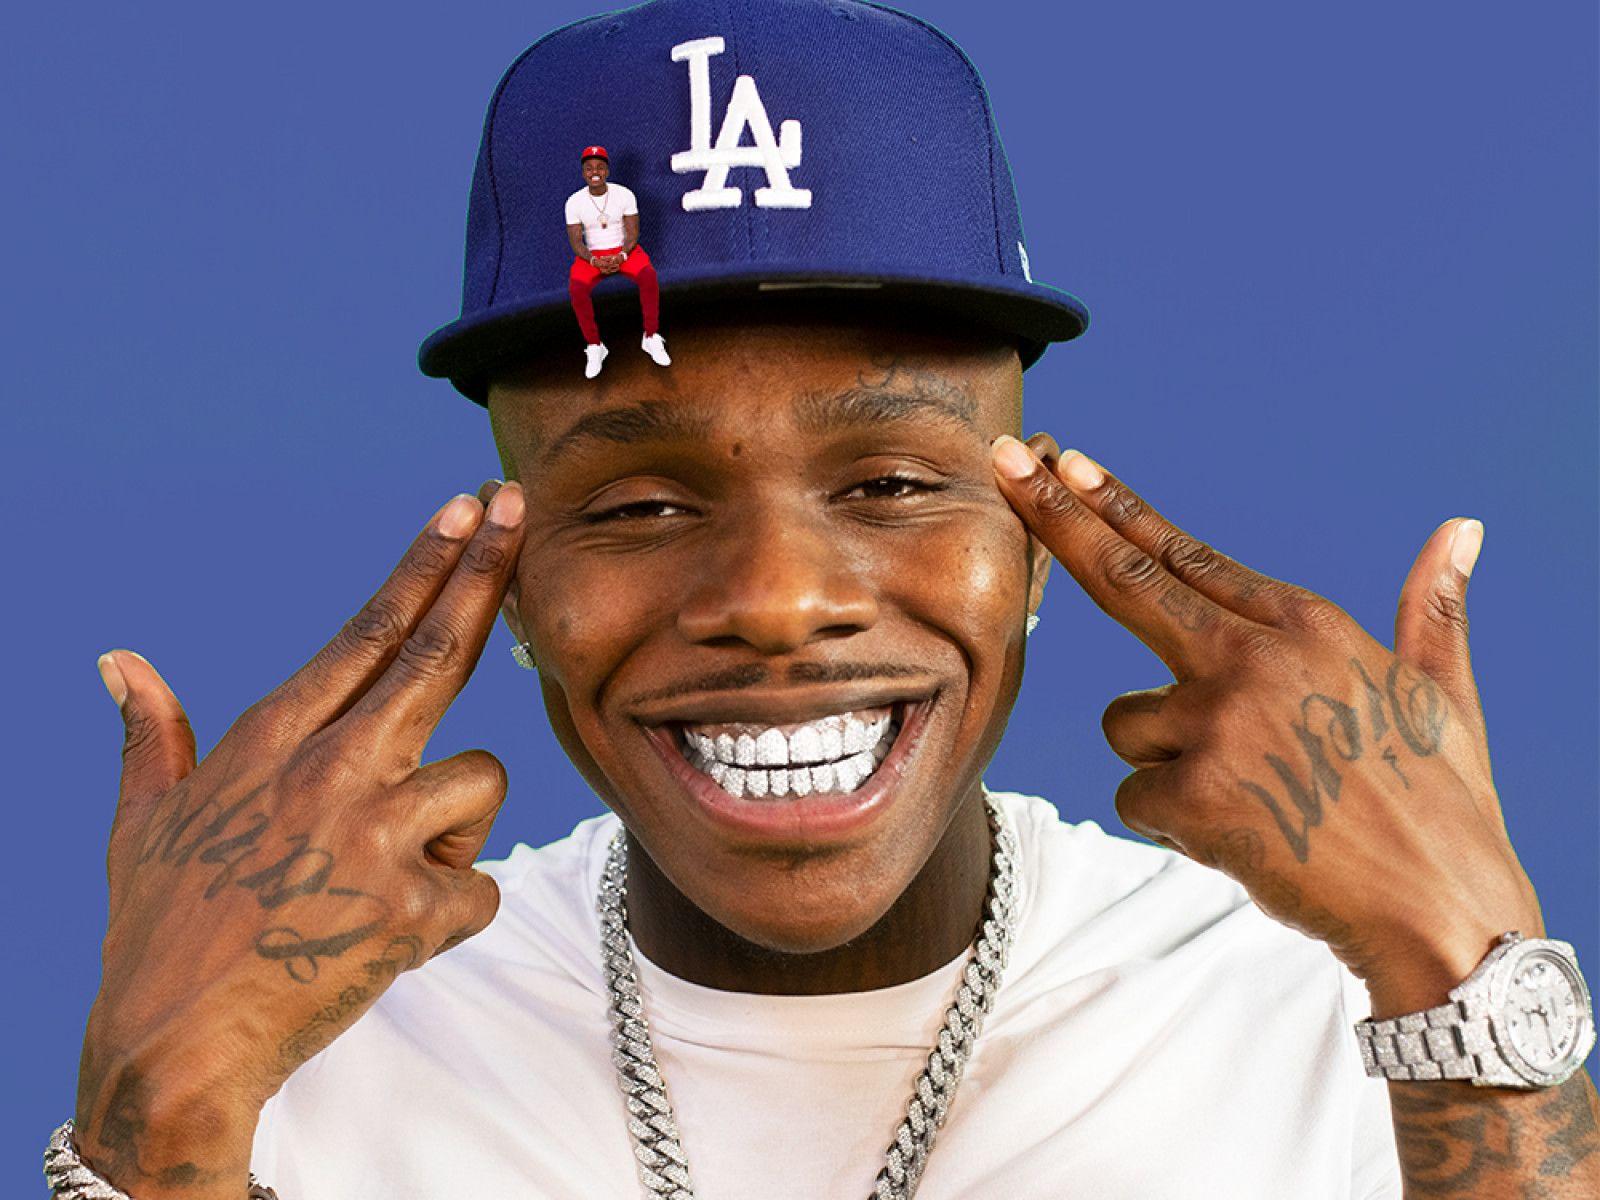 Dababy Wallpaper Iphone Xr